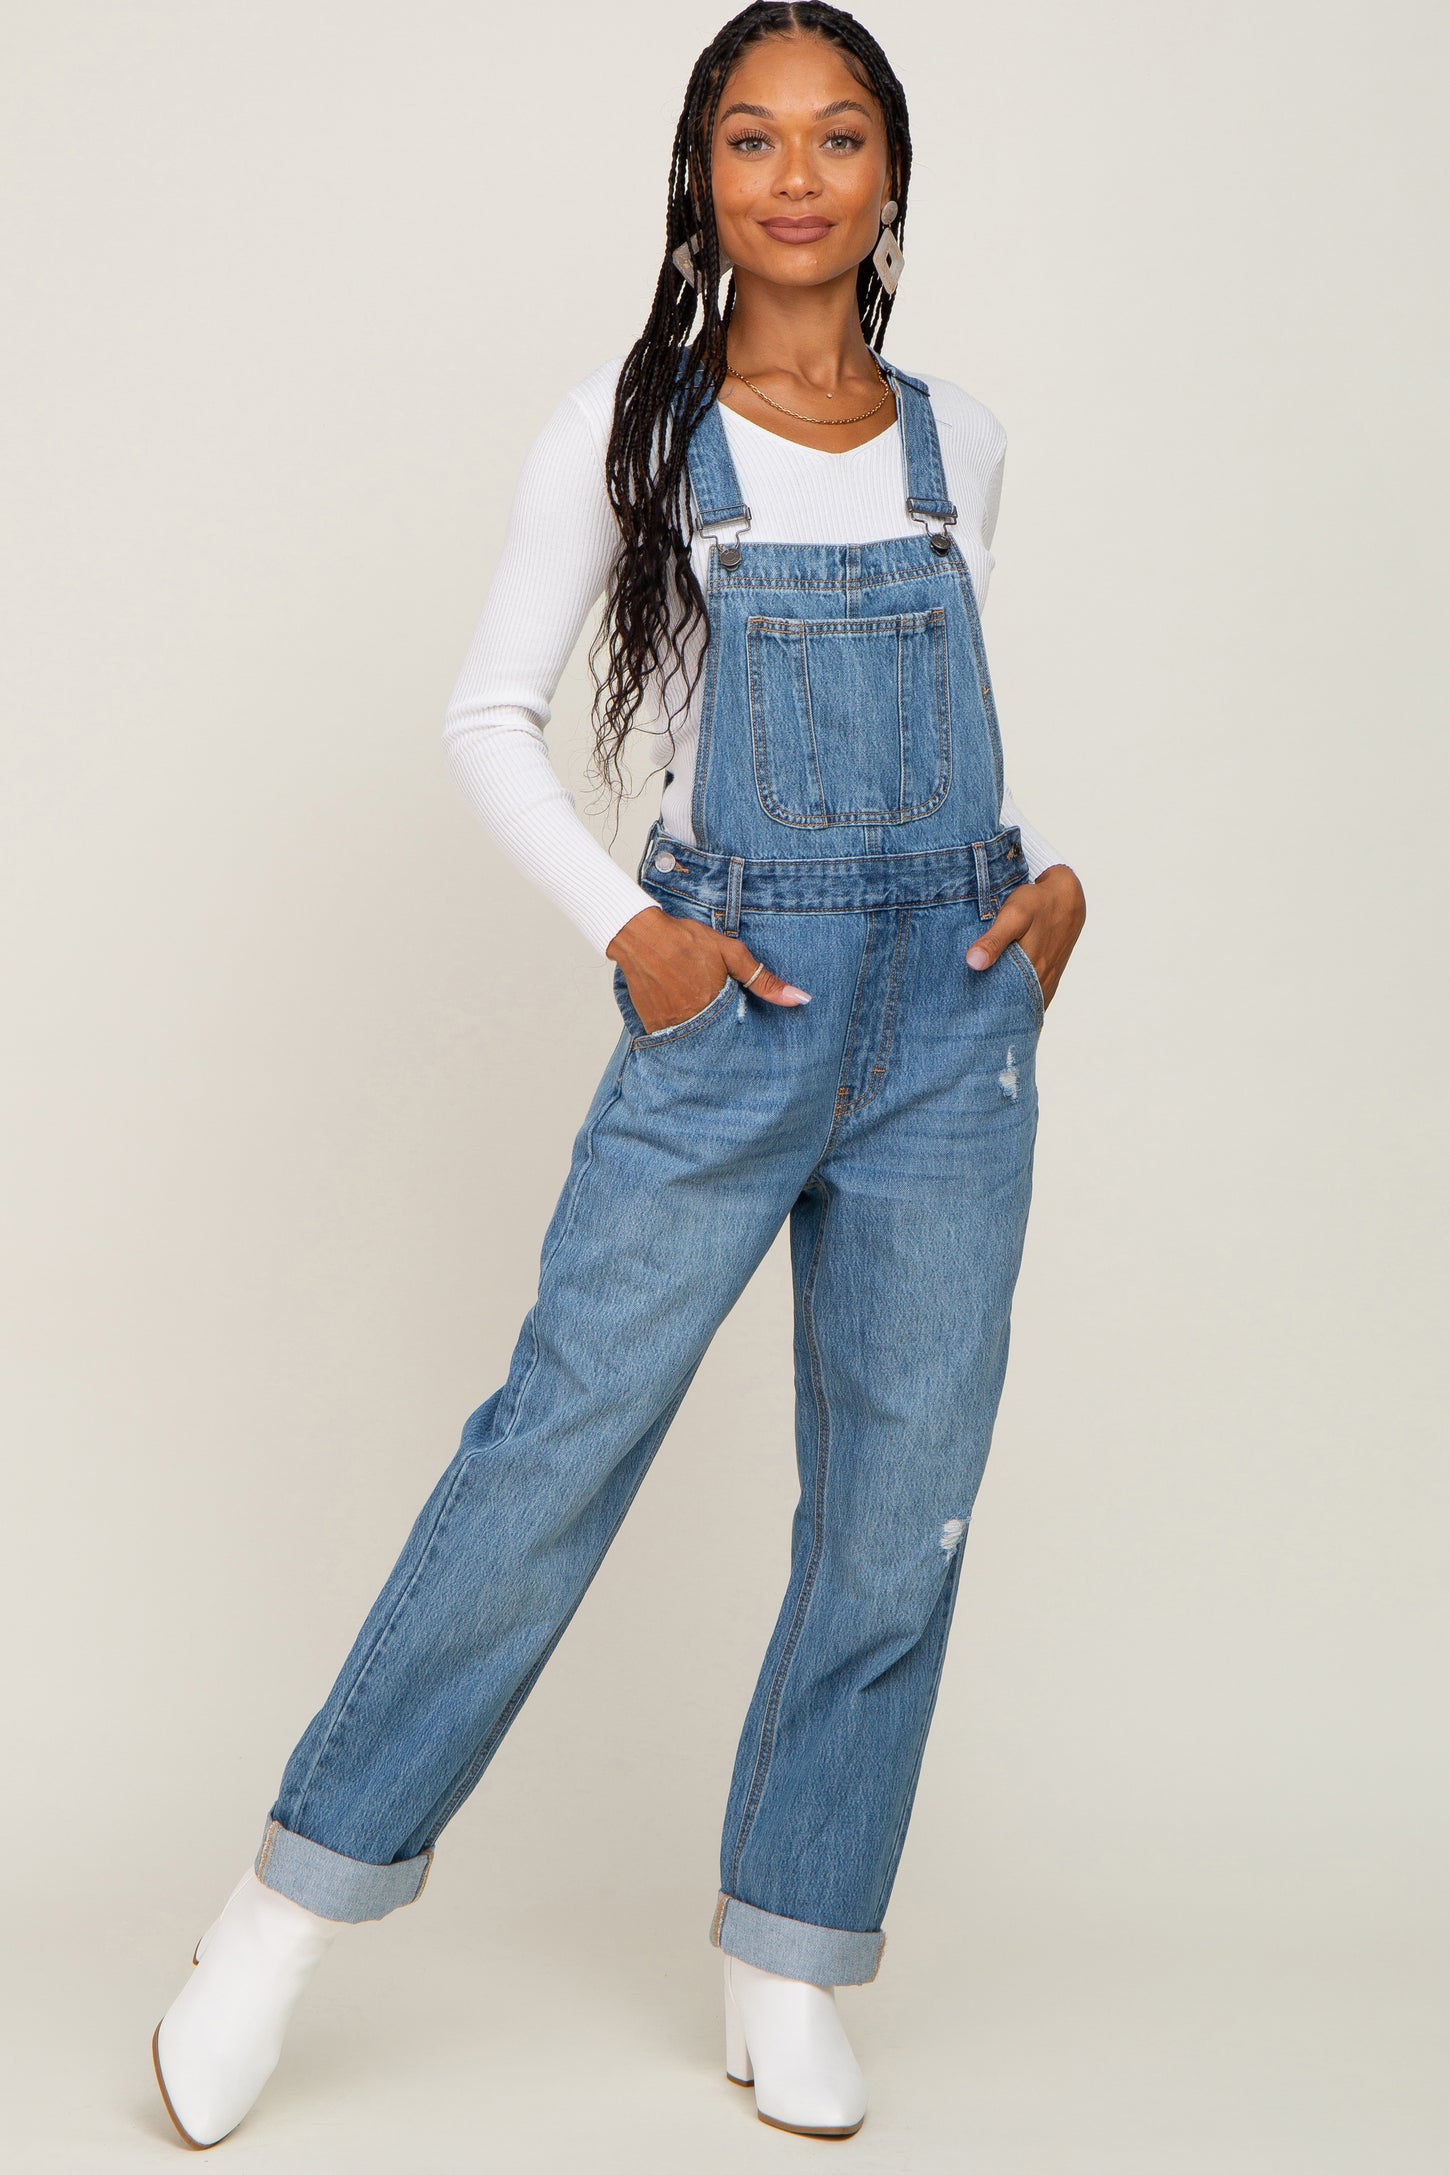 Amazon.com: Wrangler Women's Relaxed Fit Denim Overall, Lauren, X-Small  Short : Clothing, Shoes & Jewelry